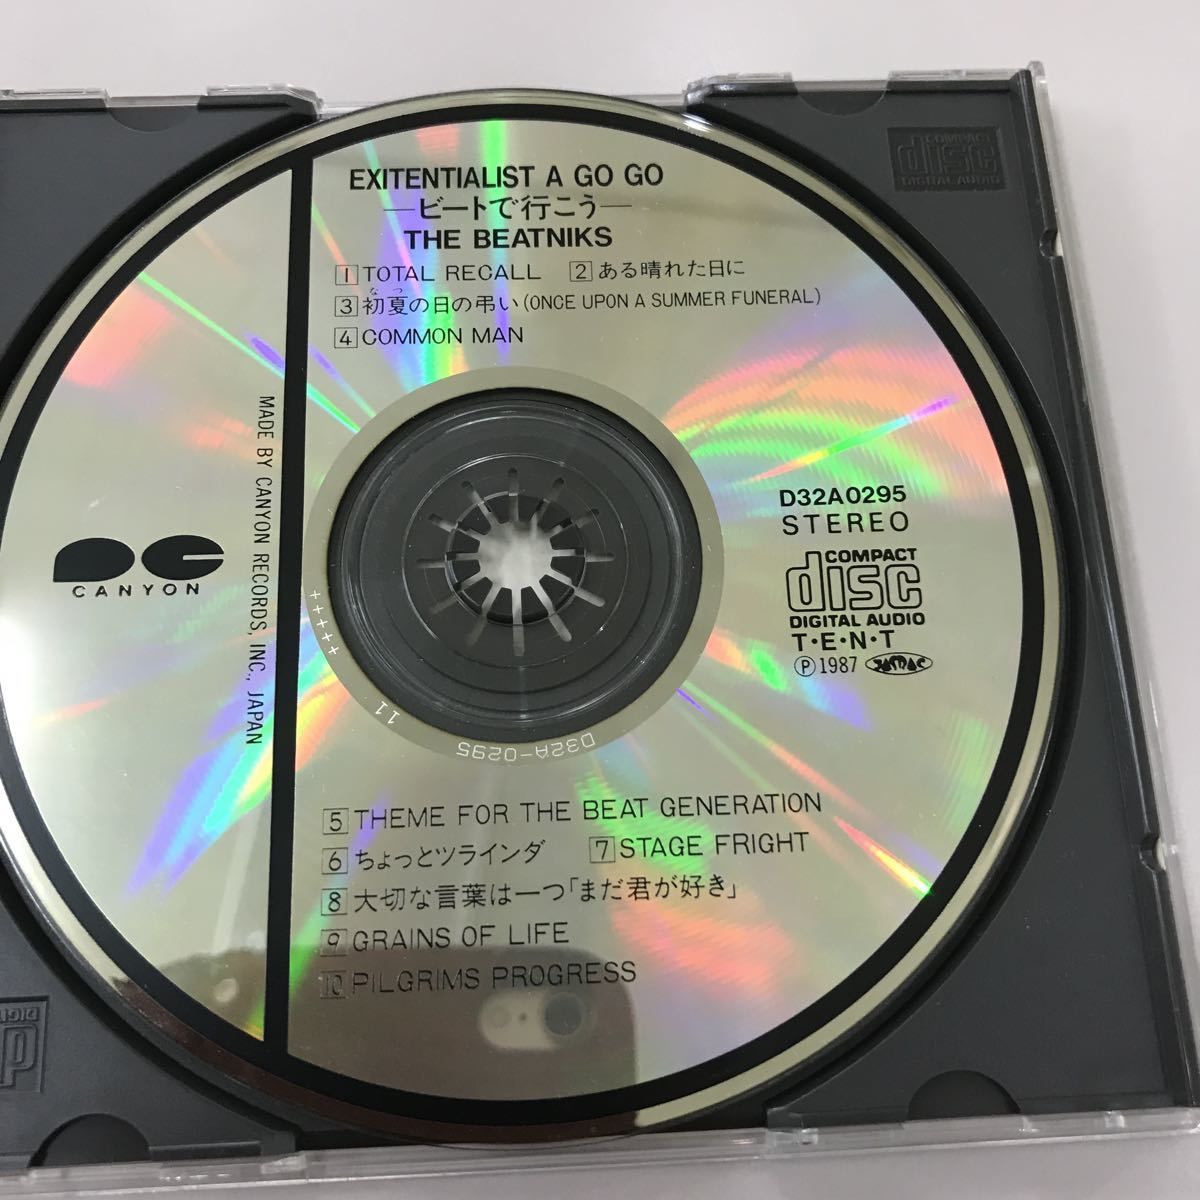 CD 中古☆【邦楽】EXITENTIALIST A GOGO THE BEATNIKS